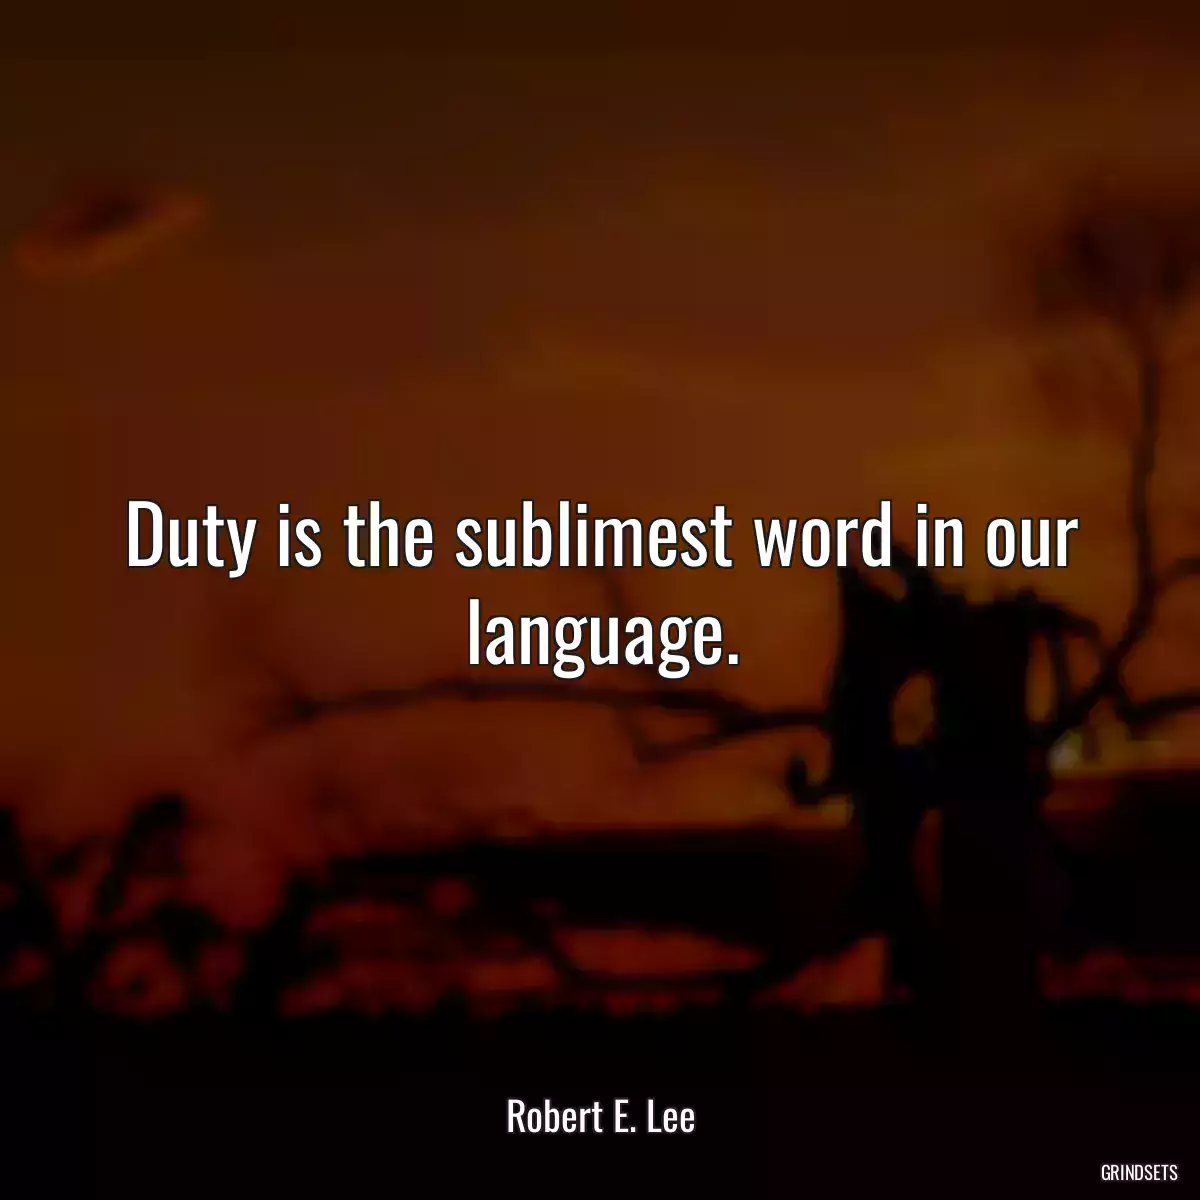 Duty is the sublimest word in our language.